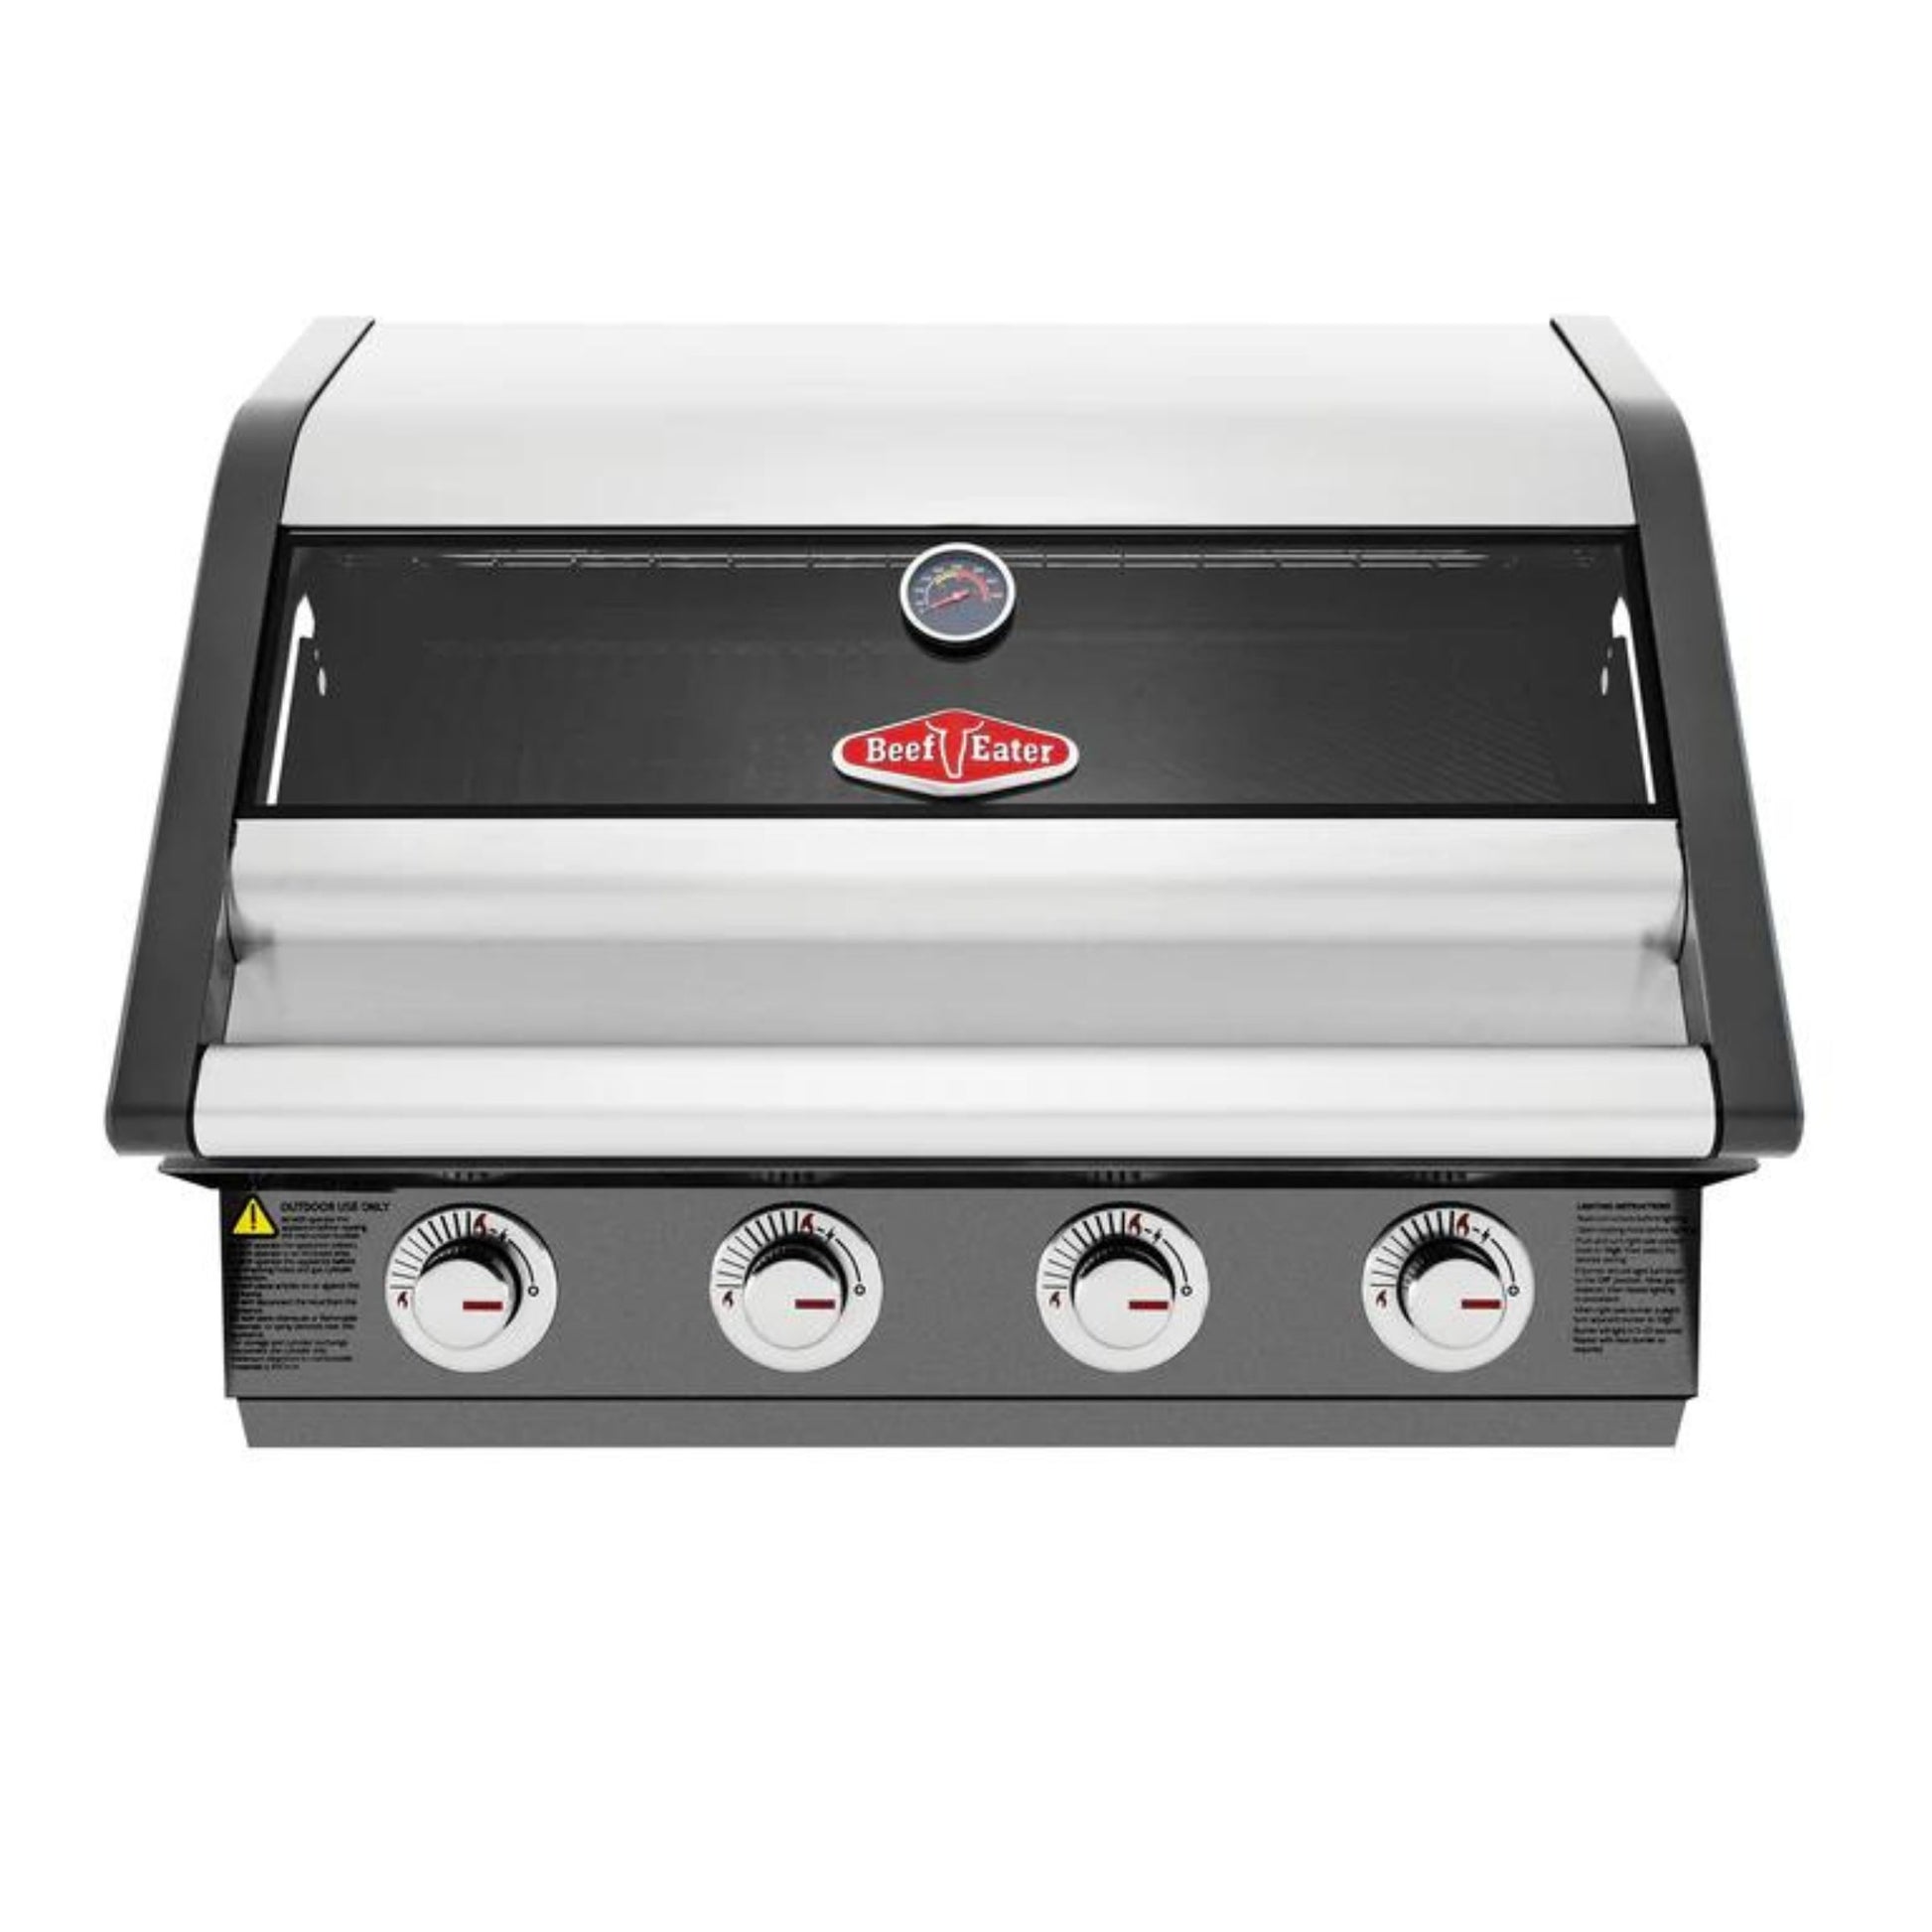 Cabinex Classic with BeefEater 4 Burner 1600E BBQ with fridge